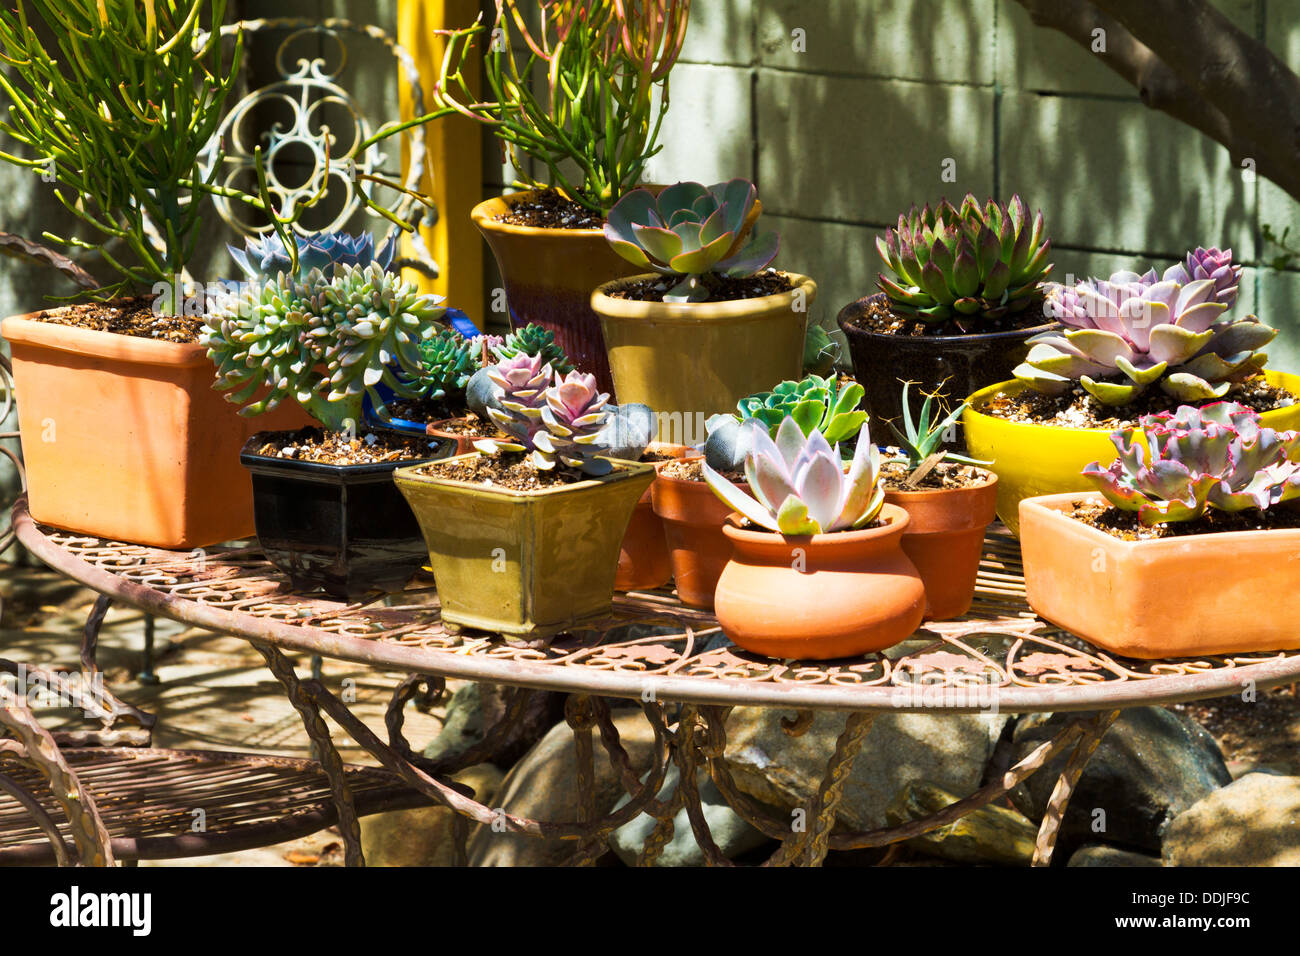 Potted succulents displayed on a wrought iron table Stock Photo